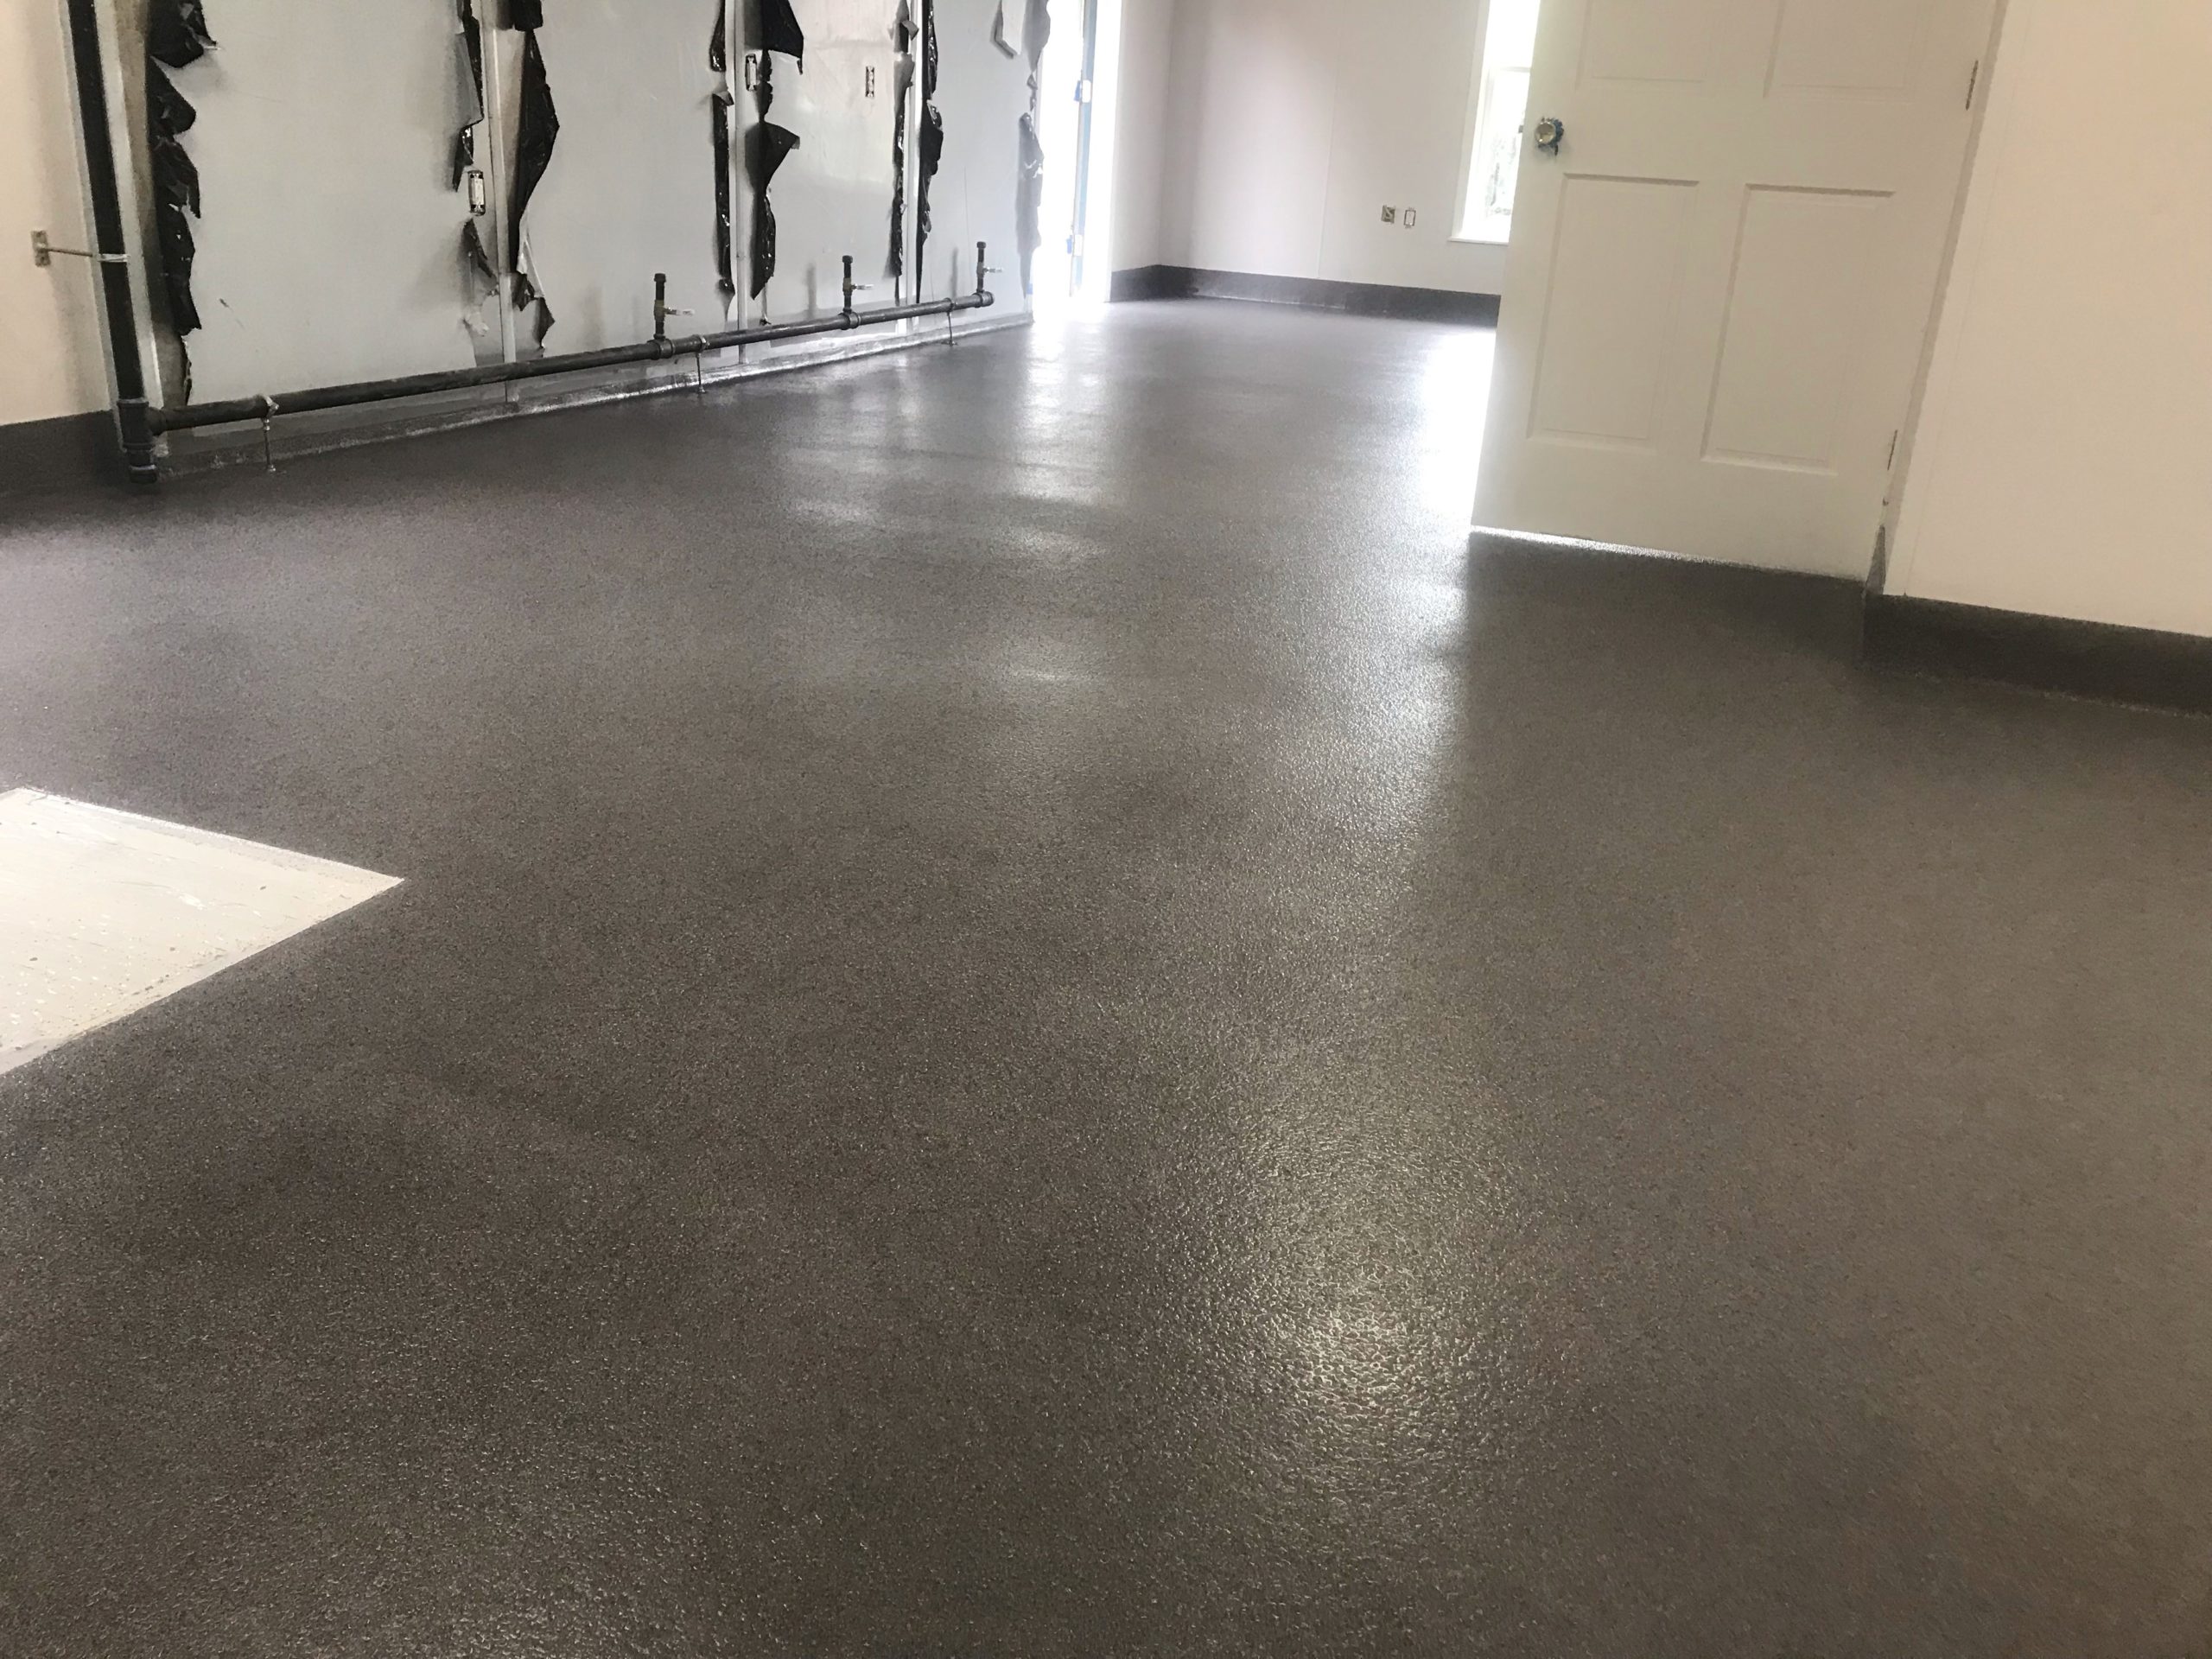 MAC-Guard Flooring in a Meals on Wheels facility